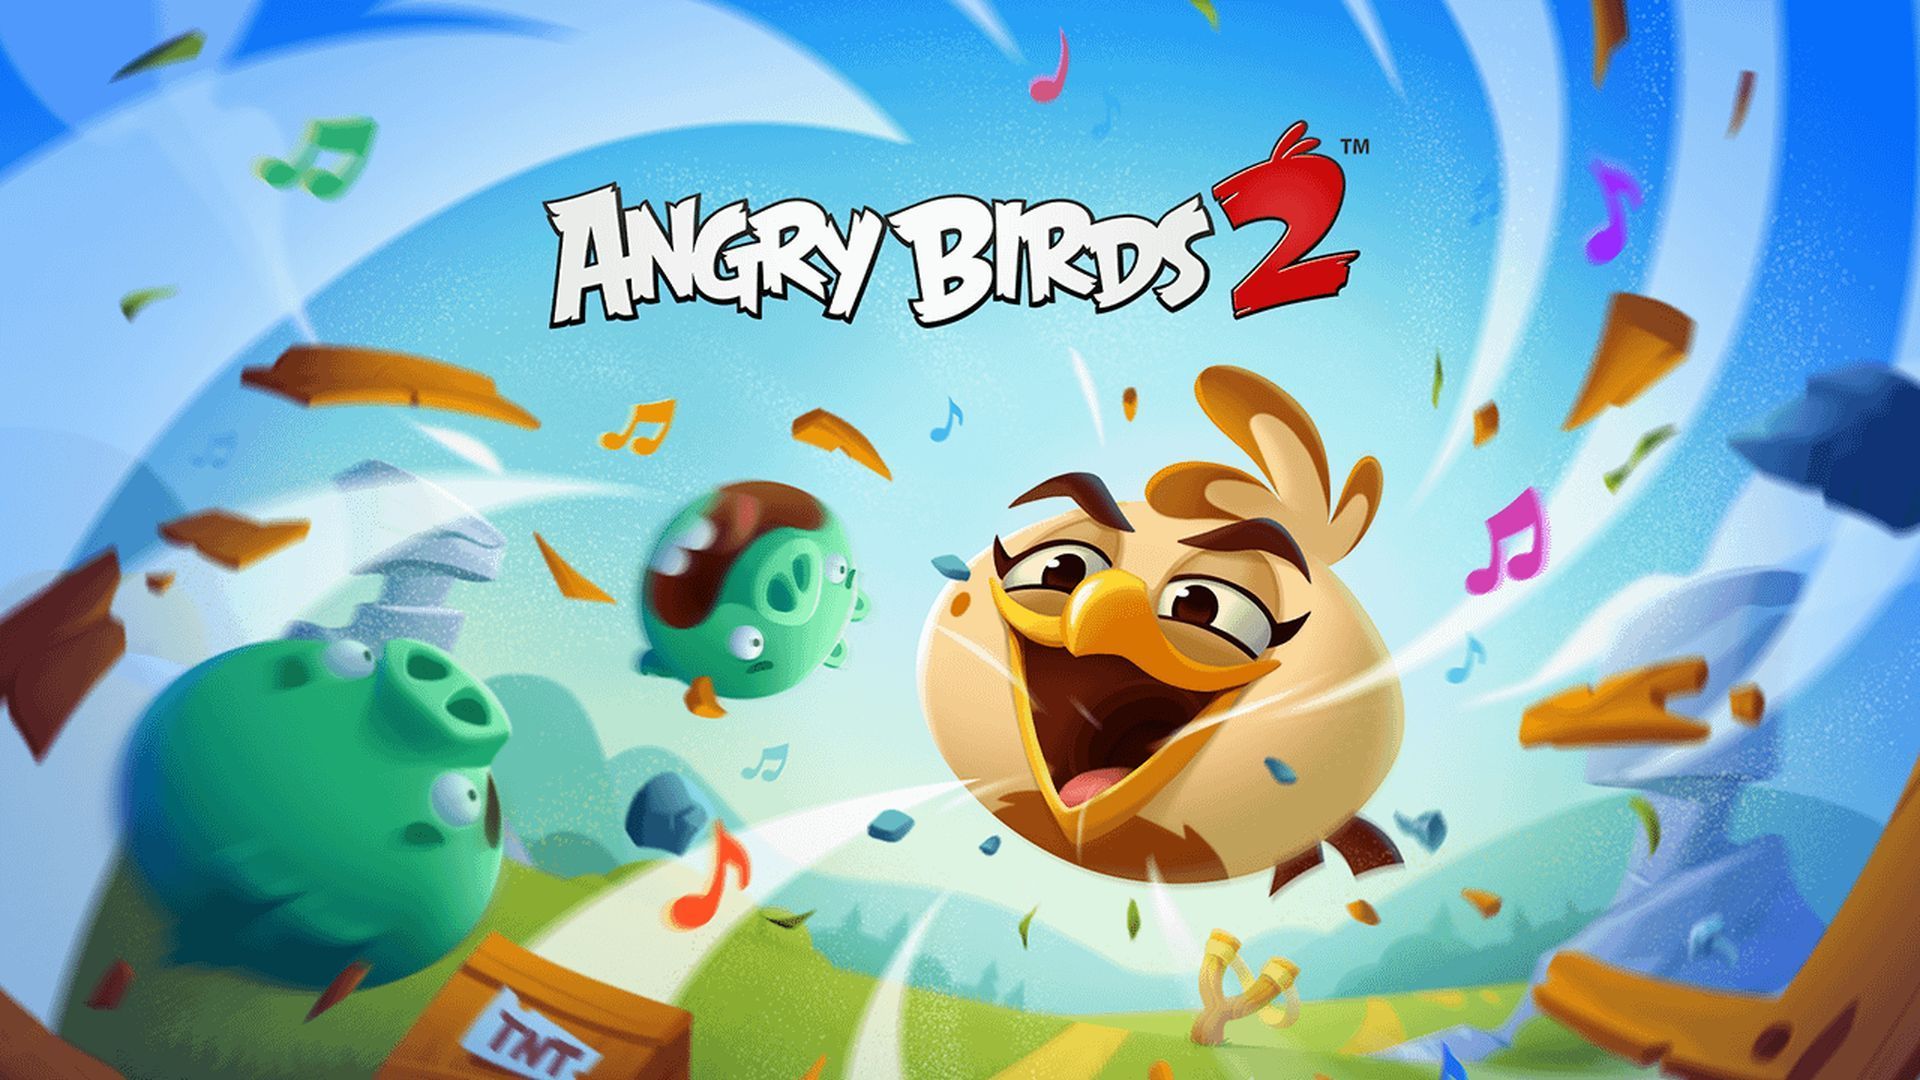 Melody, a new bird protagonist with exceptional musical abilities, has joined Angry Birds 2. You might be wondering how to unlock Melody in Angry Birds 2....